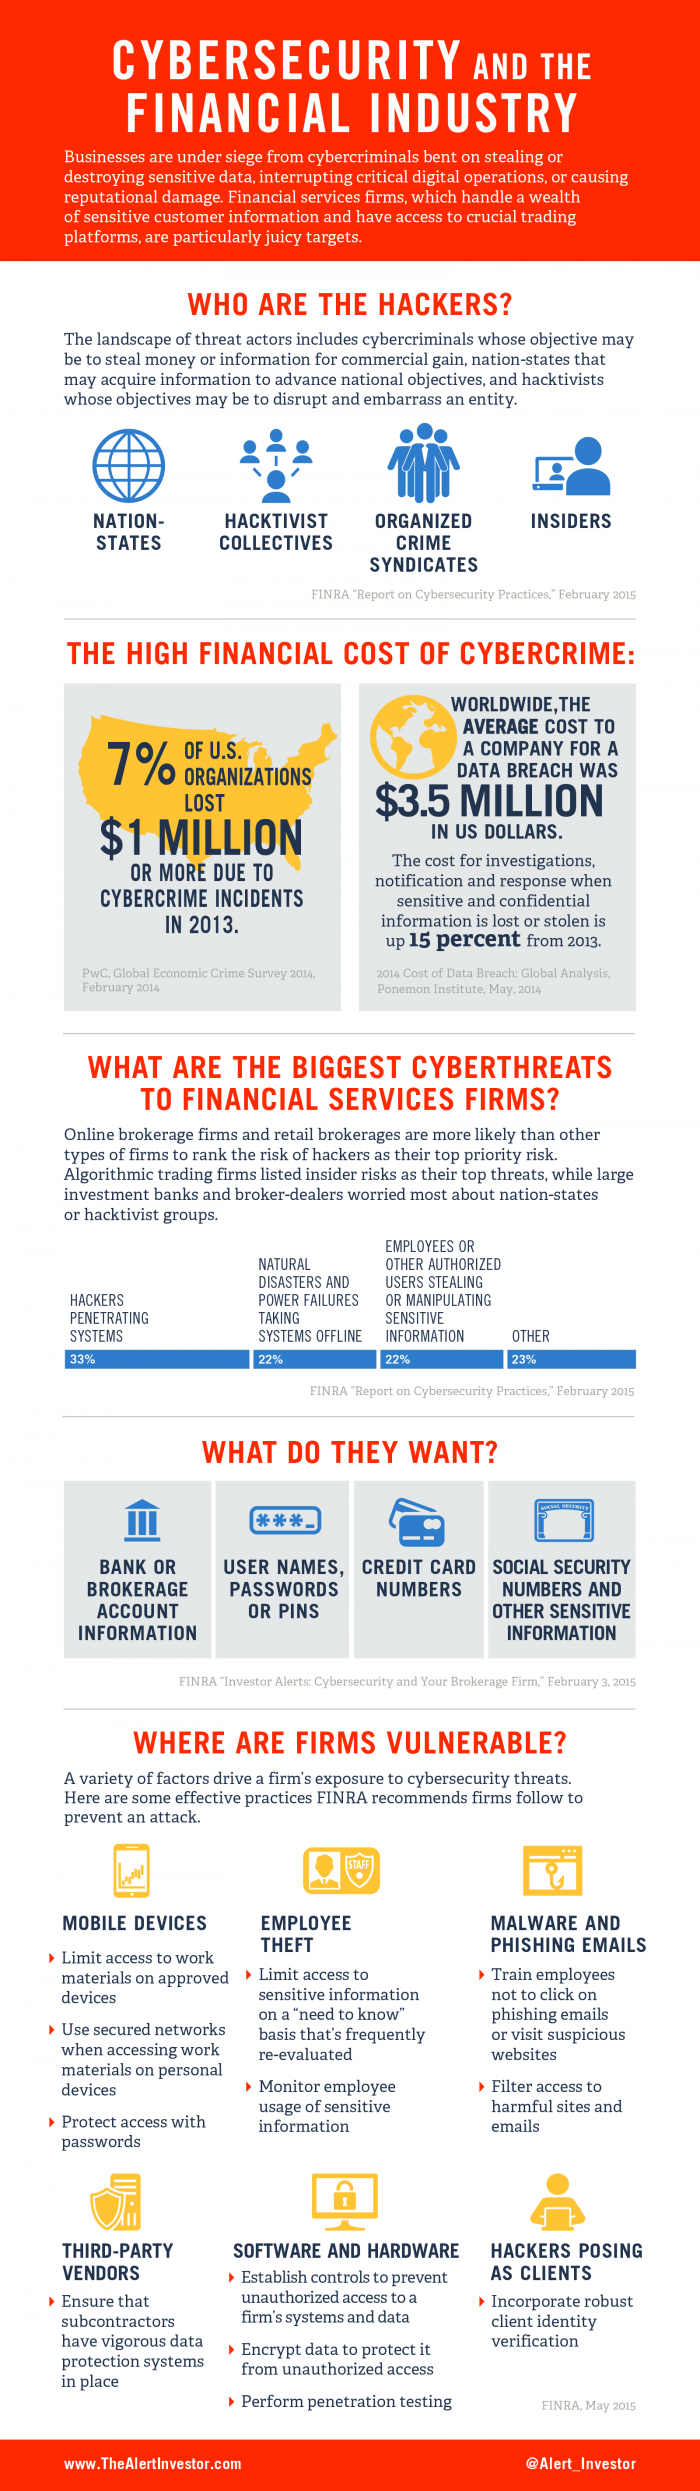 Infographic: Cybersecurity and the Financial Industry